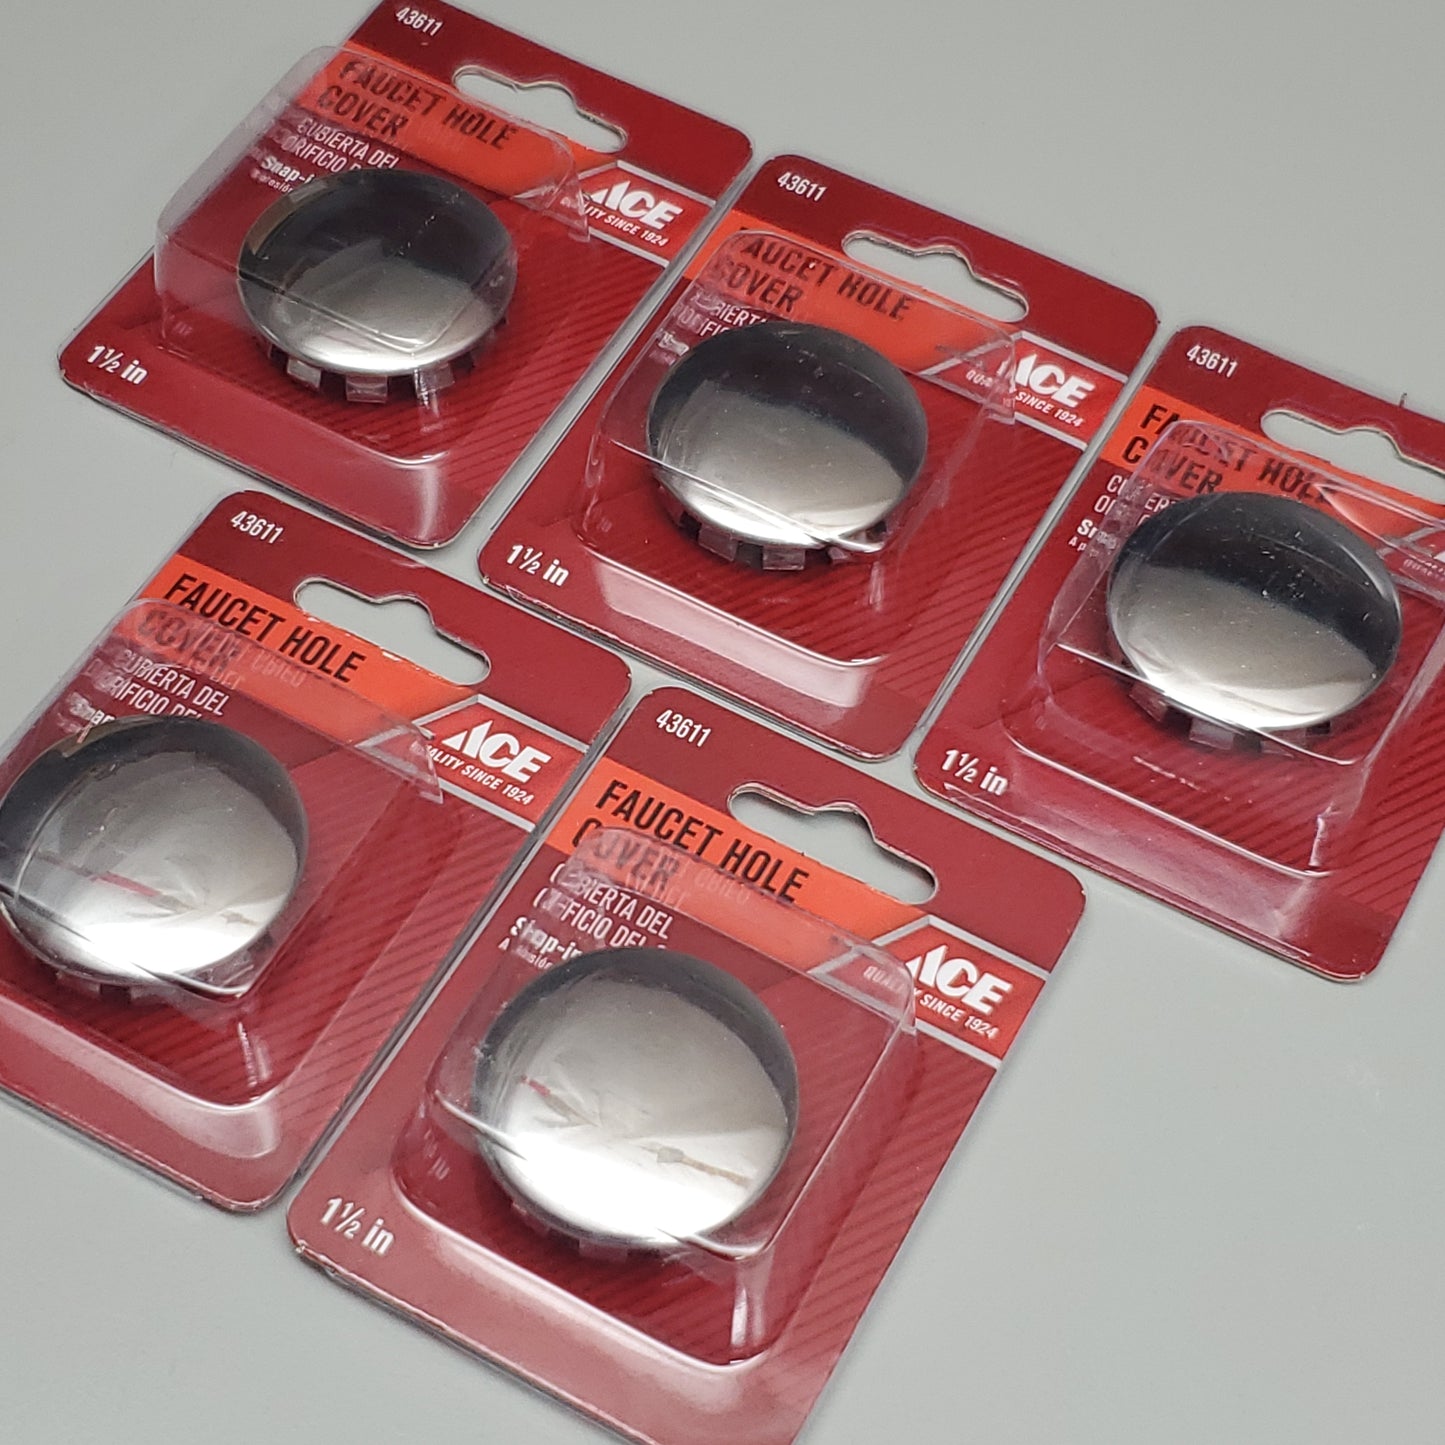 ACE 5 PK of Snap In Faucet Hole Covers Chrome 1.5" 43611 (New)